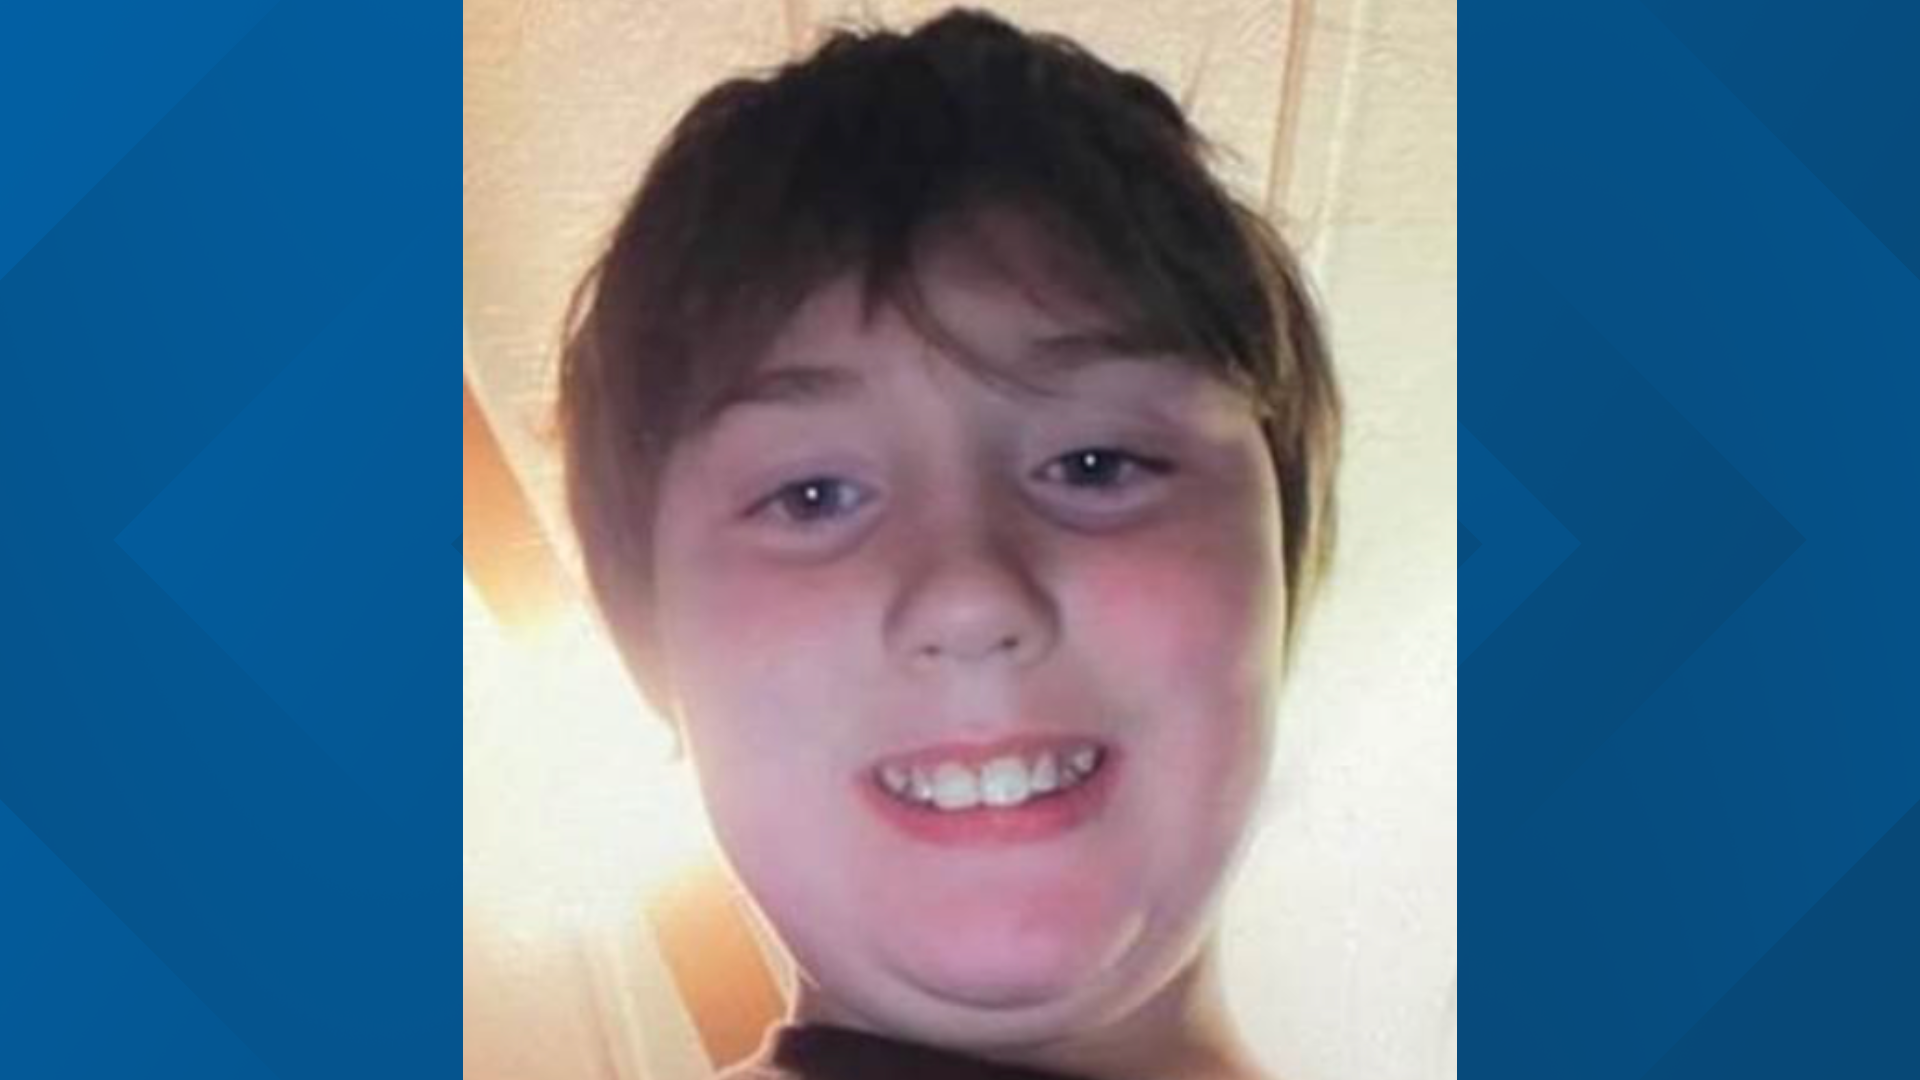 Xavior Harrelson was last seen Thursday, according to a release from the Iowa Division of Criminal Investigation.